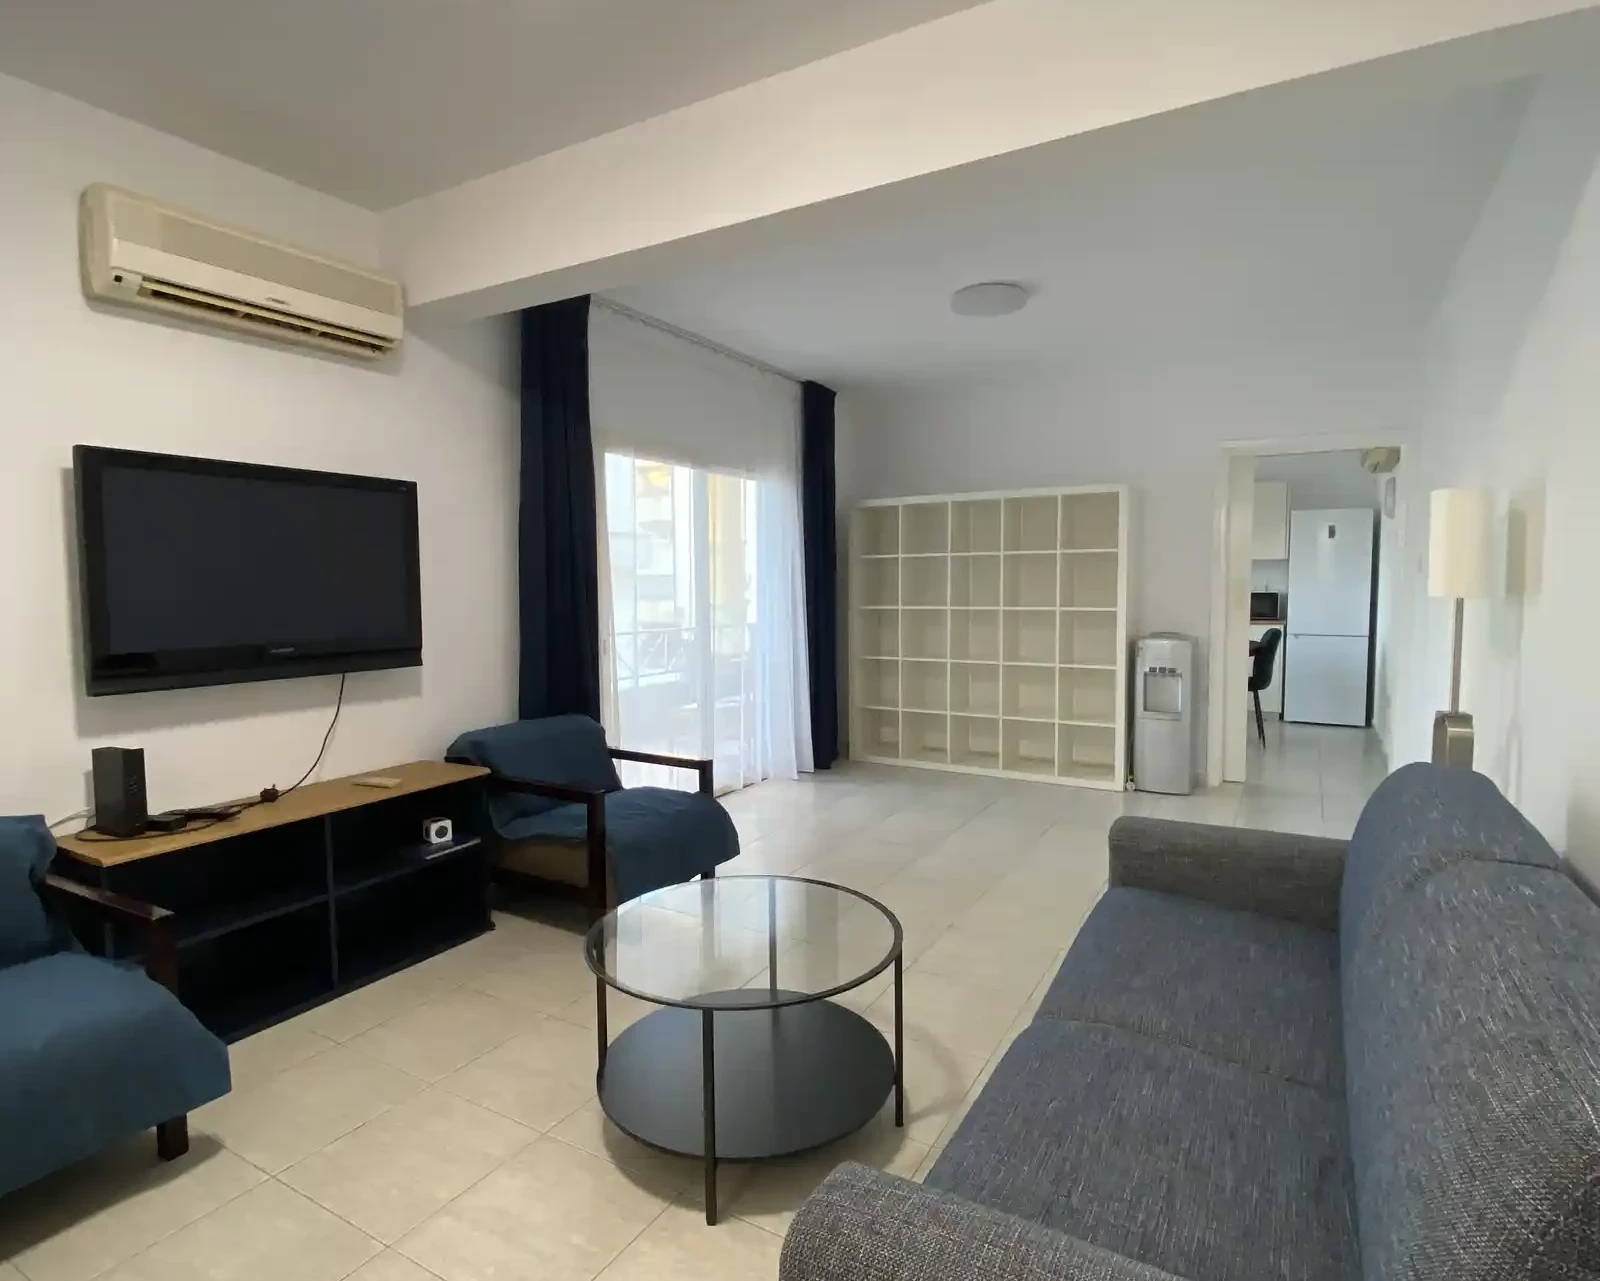 2-bedroom apartment to rent €1.600, image 1